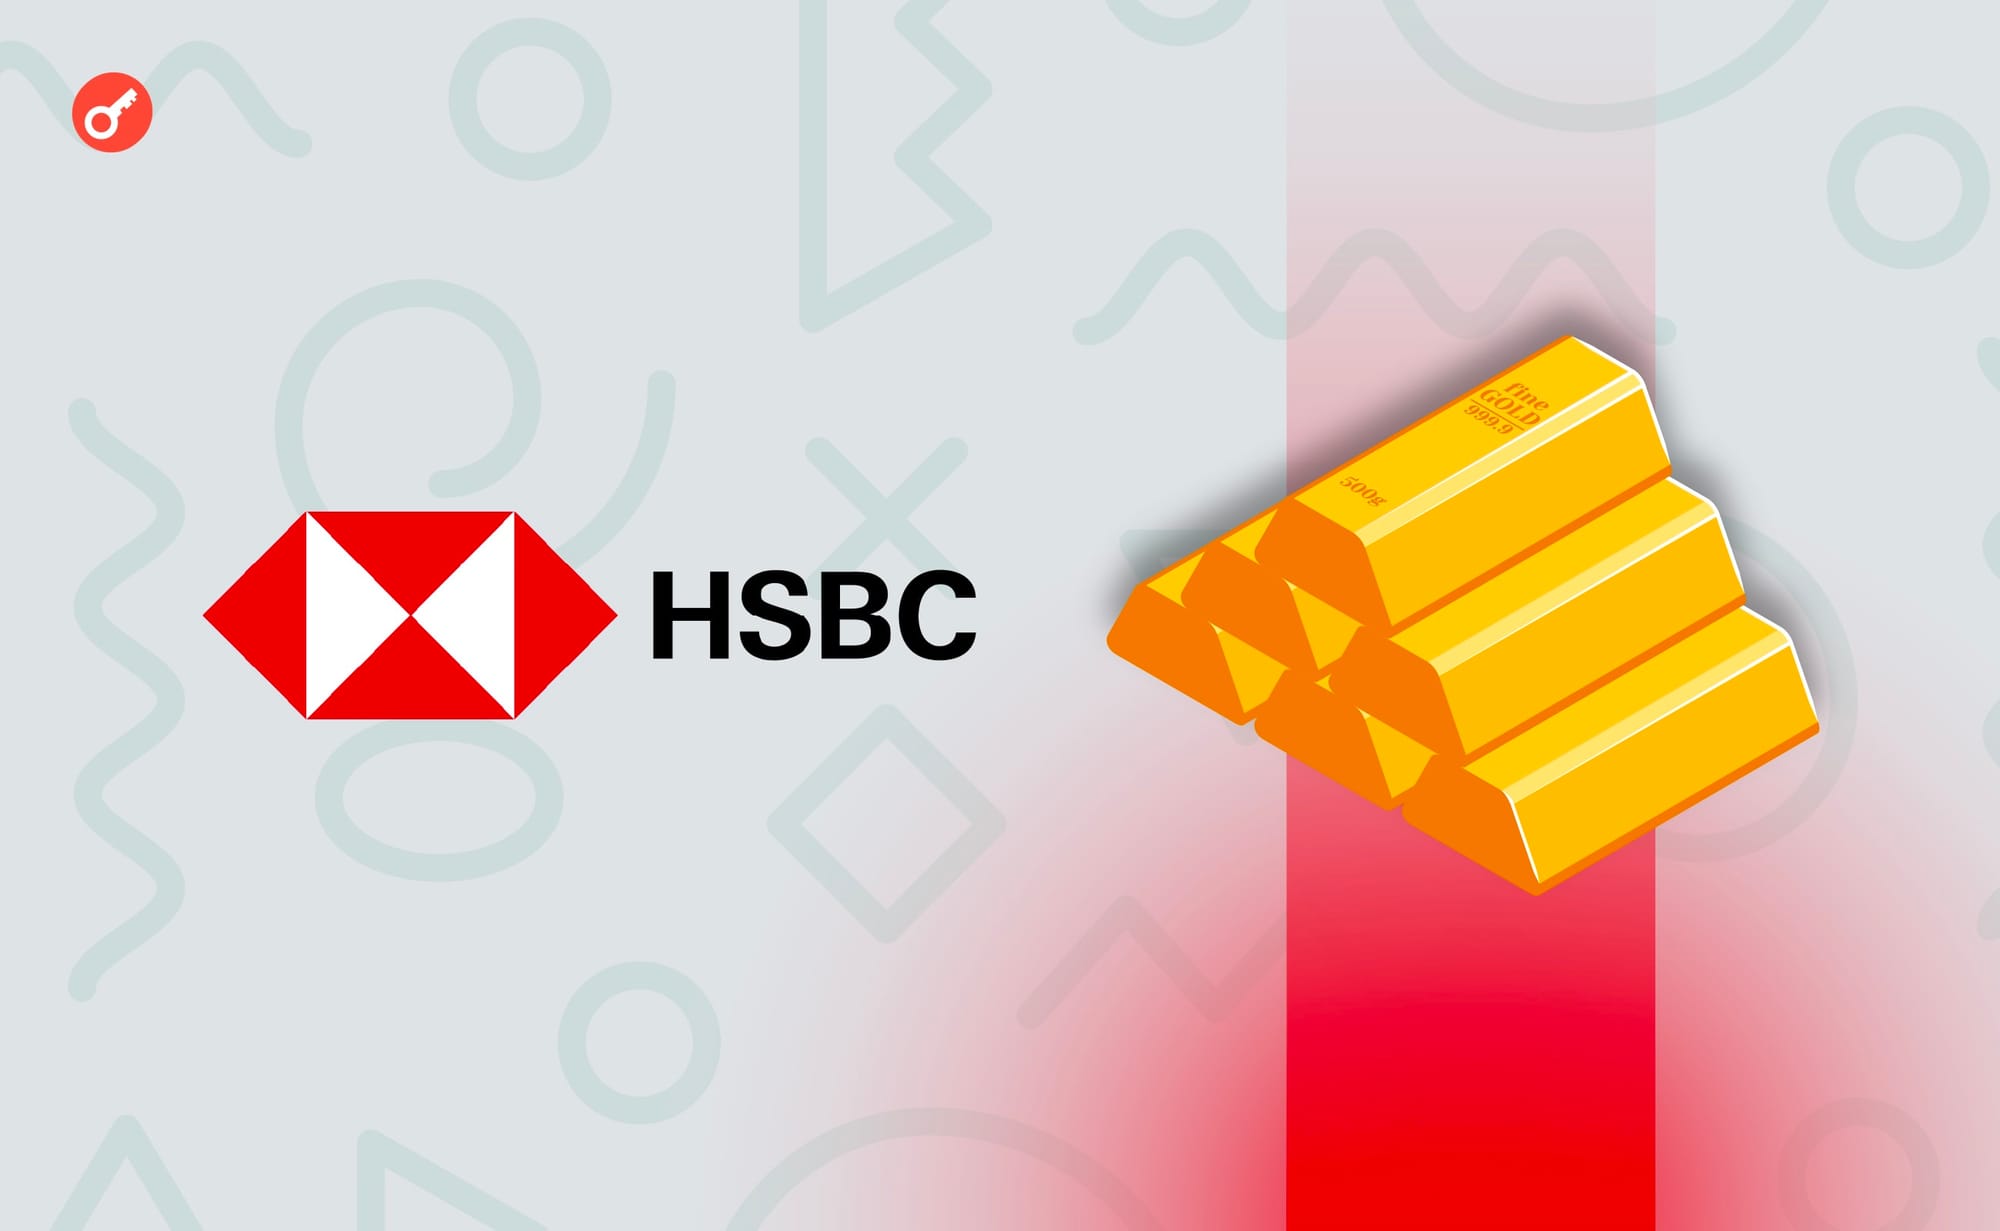 HSBC Bank has issued a gold-based token